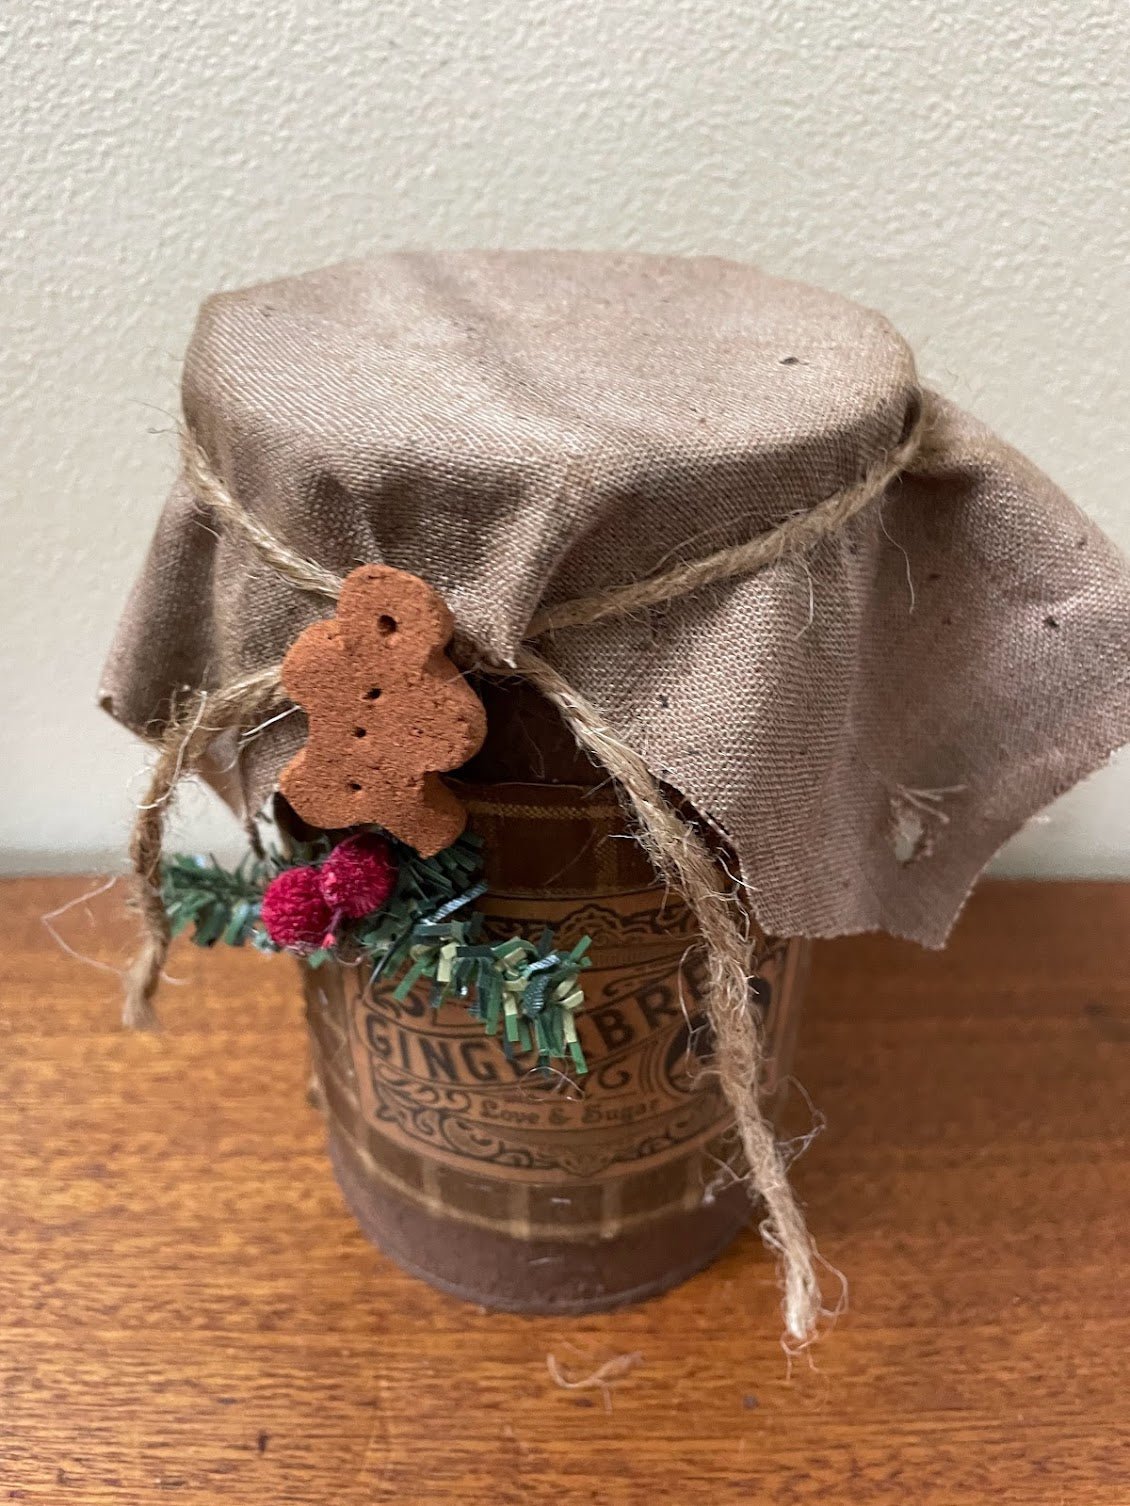 Primitive Handcrafted Colonial Christmas Love and Sugar Gingerbread Tin - The Primitive Pineapple Collection